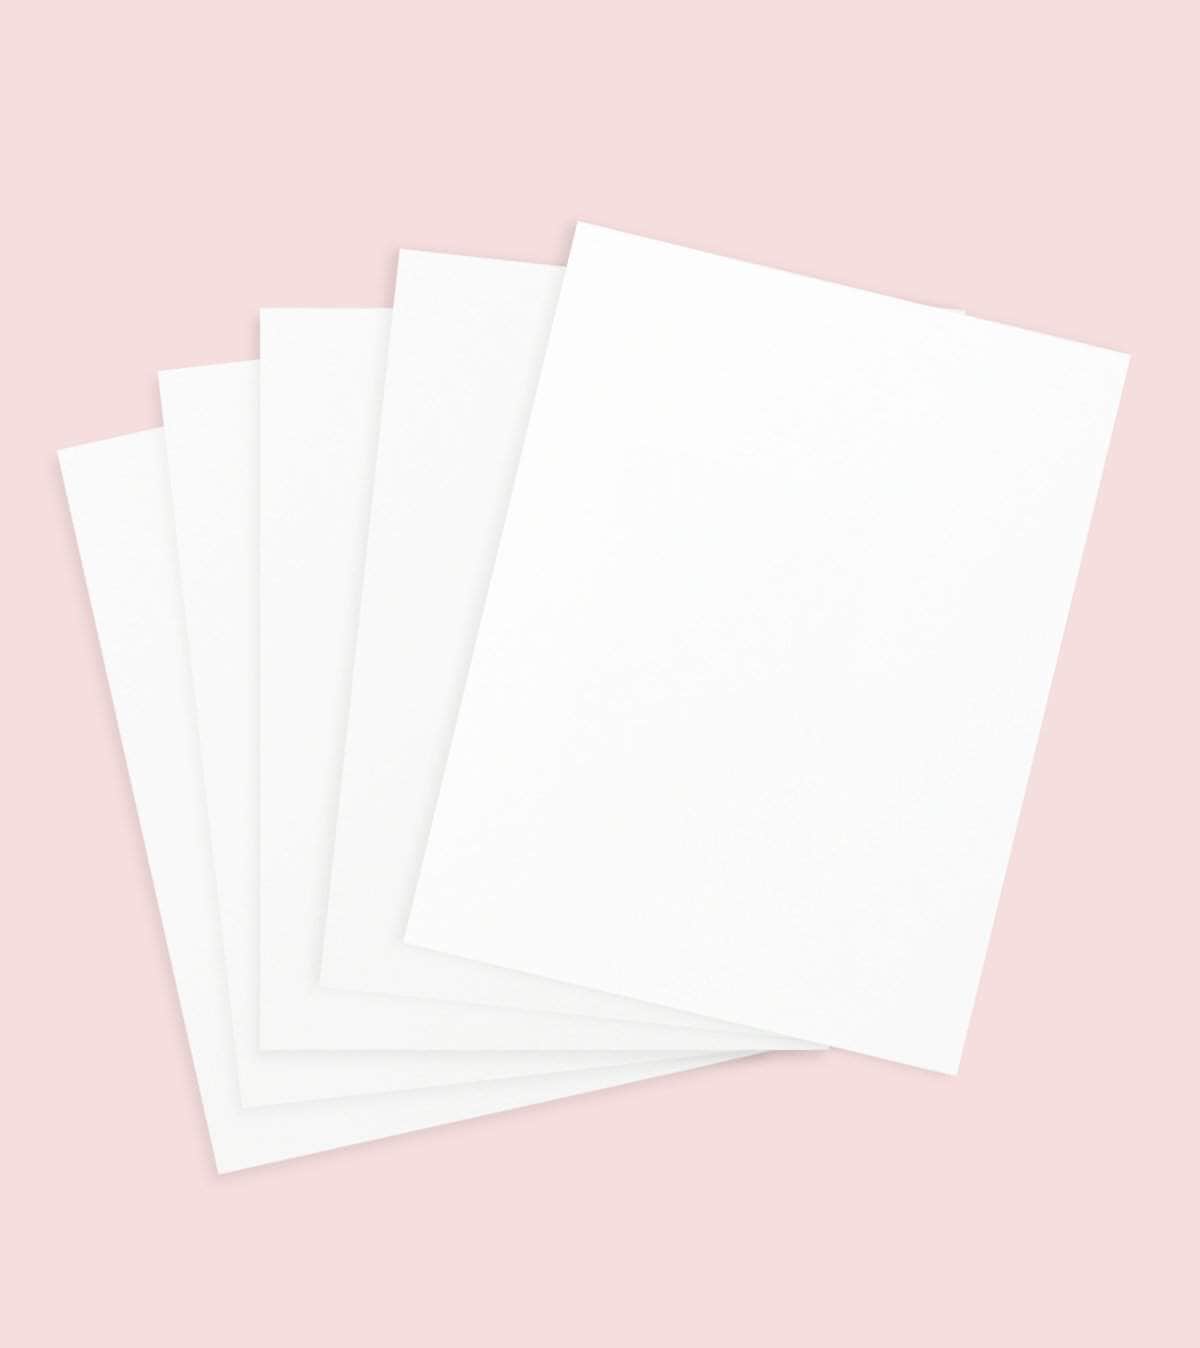 Bulk Blank White or Natural A2 sized Discount Card Stock